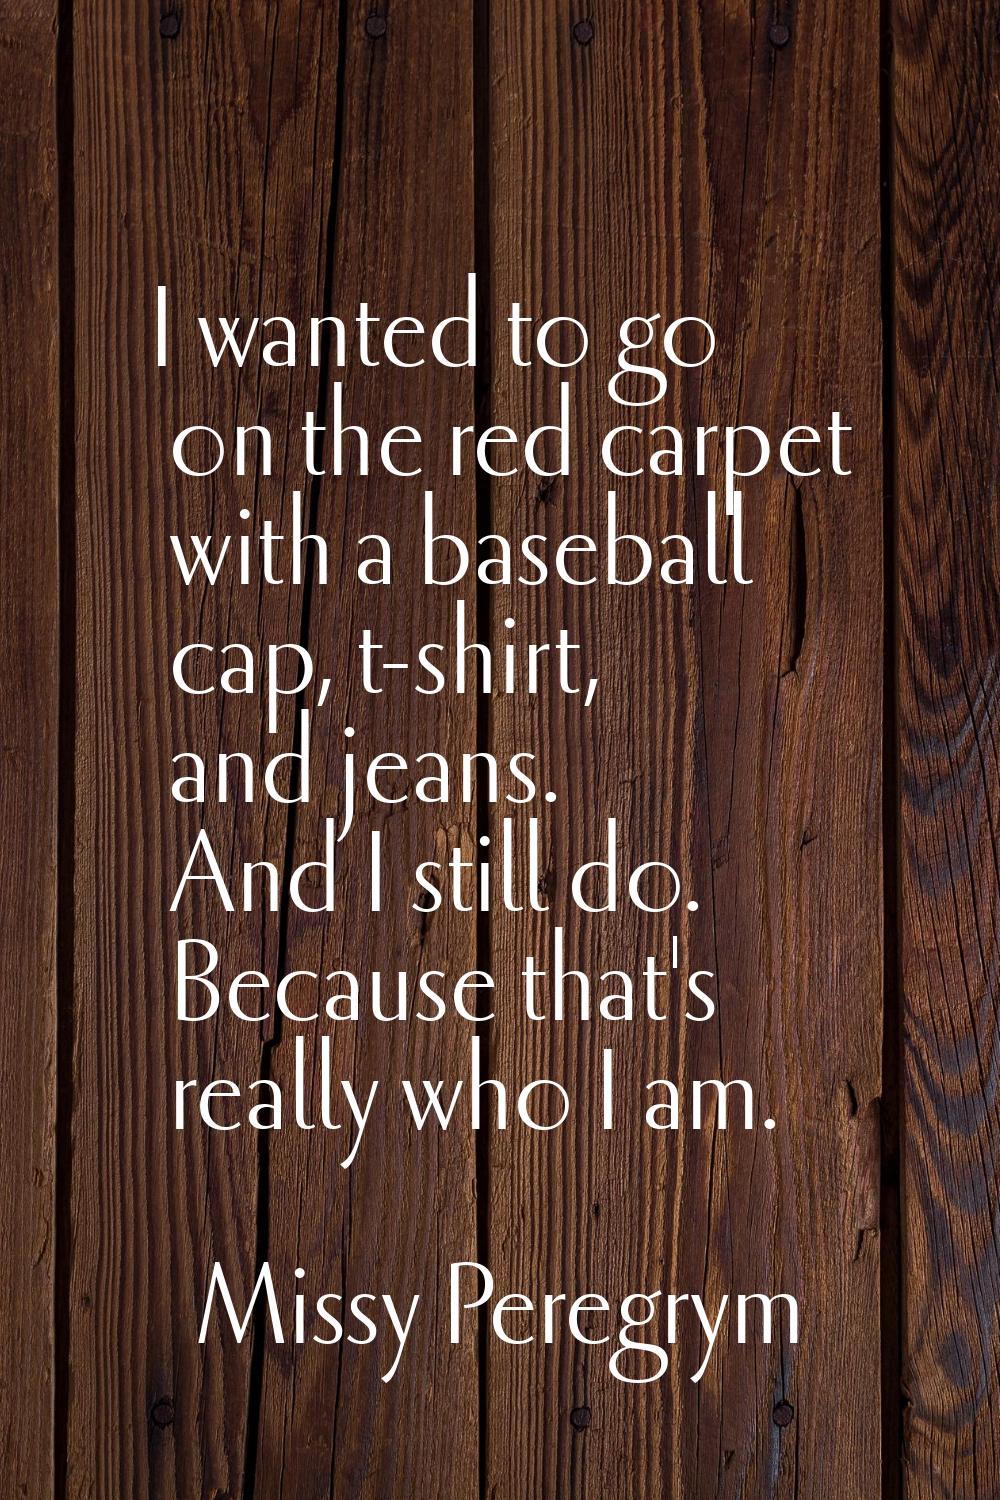 I wanted to go on the red carpet with a baseball cap, t-shirt, and jeans. And I still do. Because t